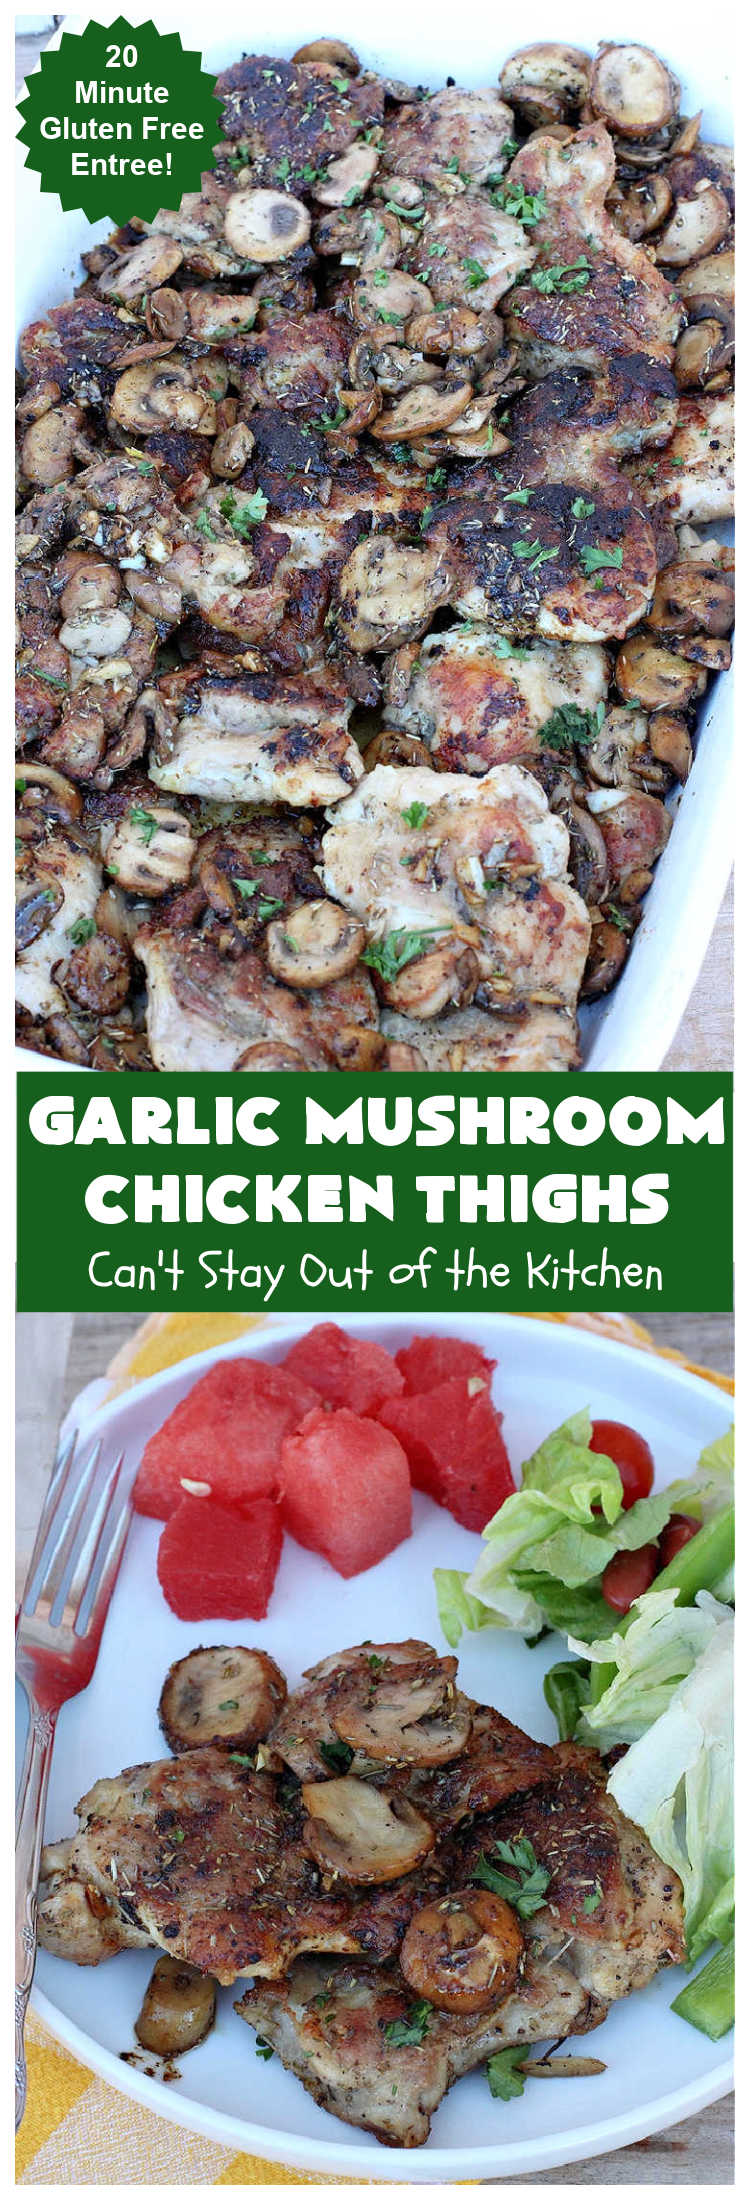 Garlic Mushroom Chicken Thighs | Can't Stay Out of the Kitchen | This is a fantastic 20-minute #chicken entree! It's the best #recipe I've found this year! I made it for a #potluck & everyone raved over it. It pairs well with any side dish & is great for family or company meals. #garlic #mushrooms #GlutenFree #GarlicMushroomChickenThighs